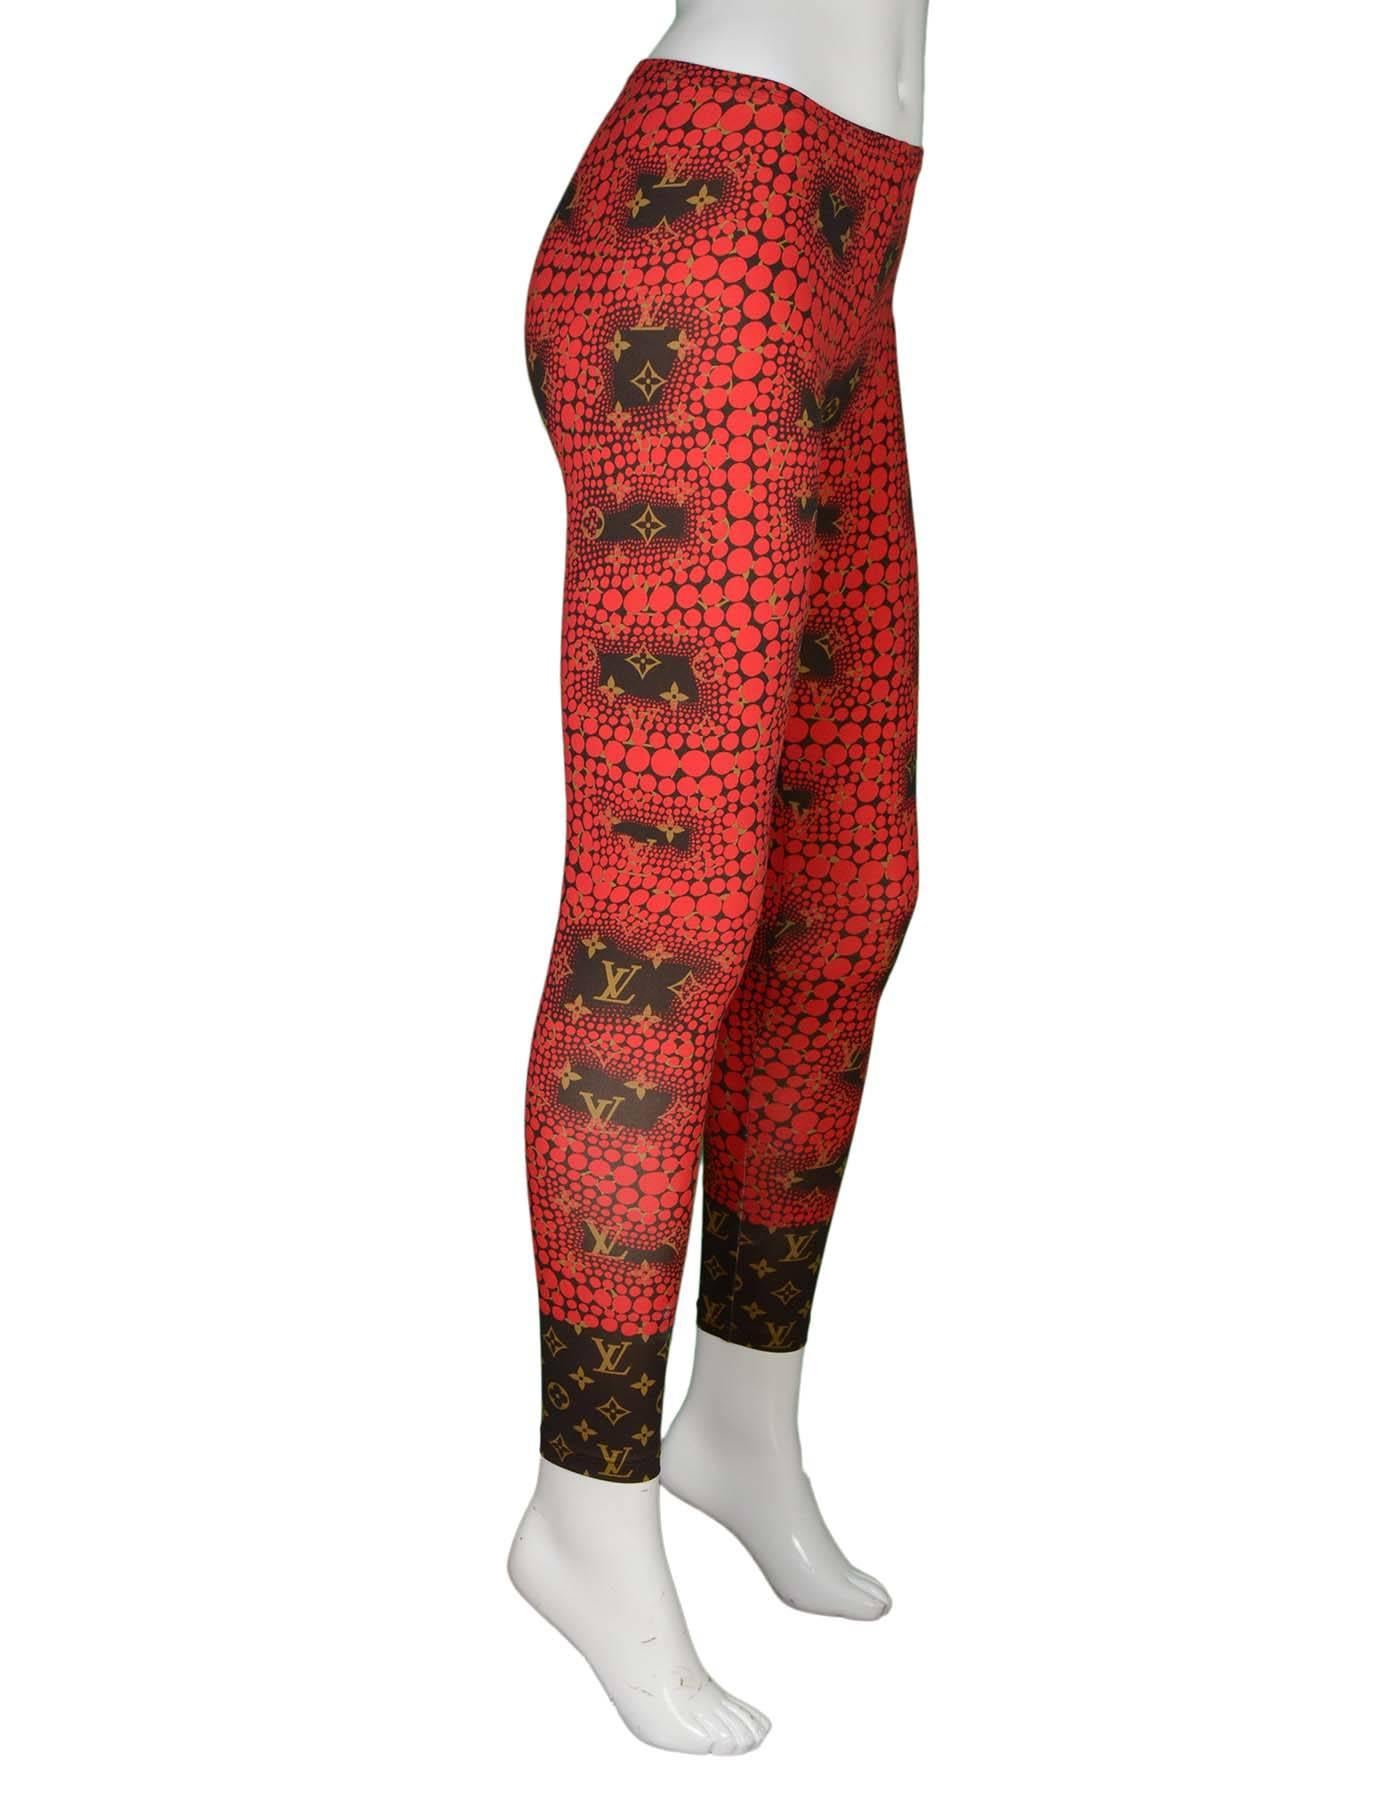 100% Authentic Limited Edition Louis Vuitton Red Monogram Yayoi Kusama Dots Legging.  Features brown monogram covered by dot design created by curated artist Yayoi Kusama. This line was very hard to find and sold out in most stores.

    Made In: